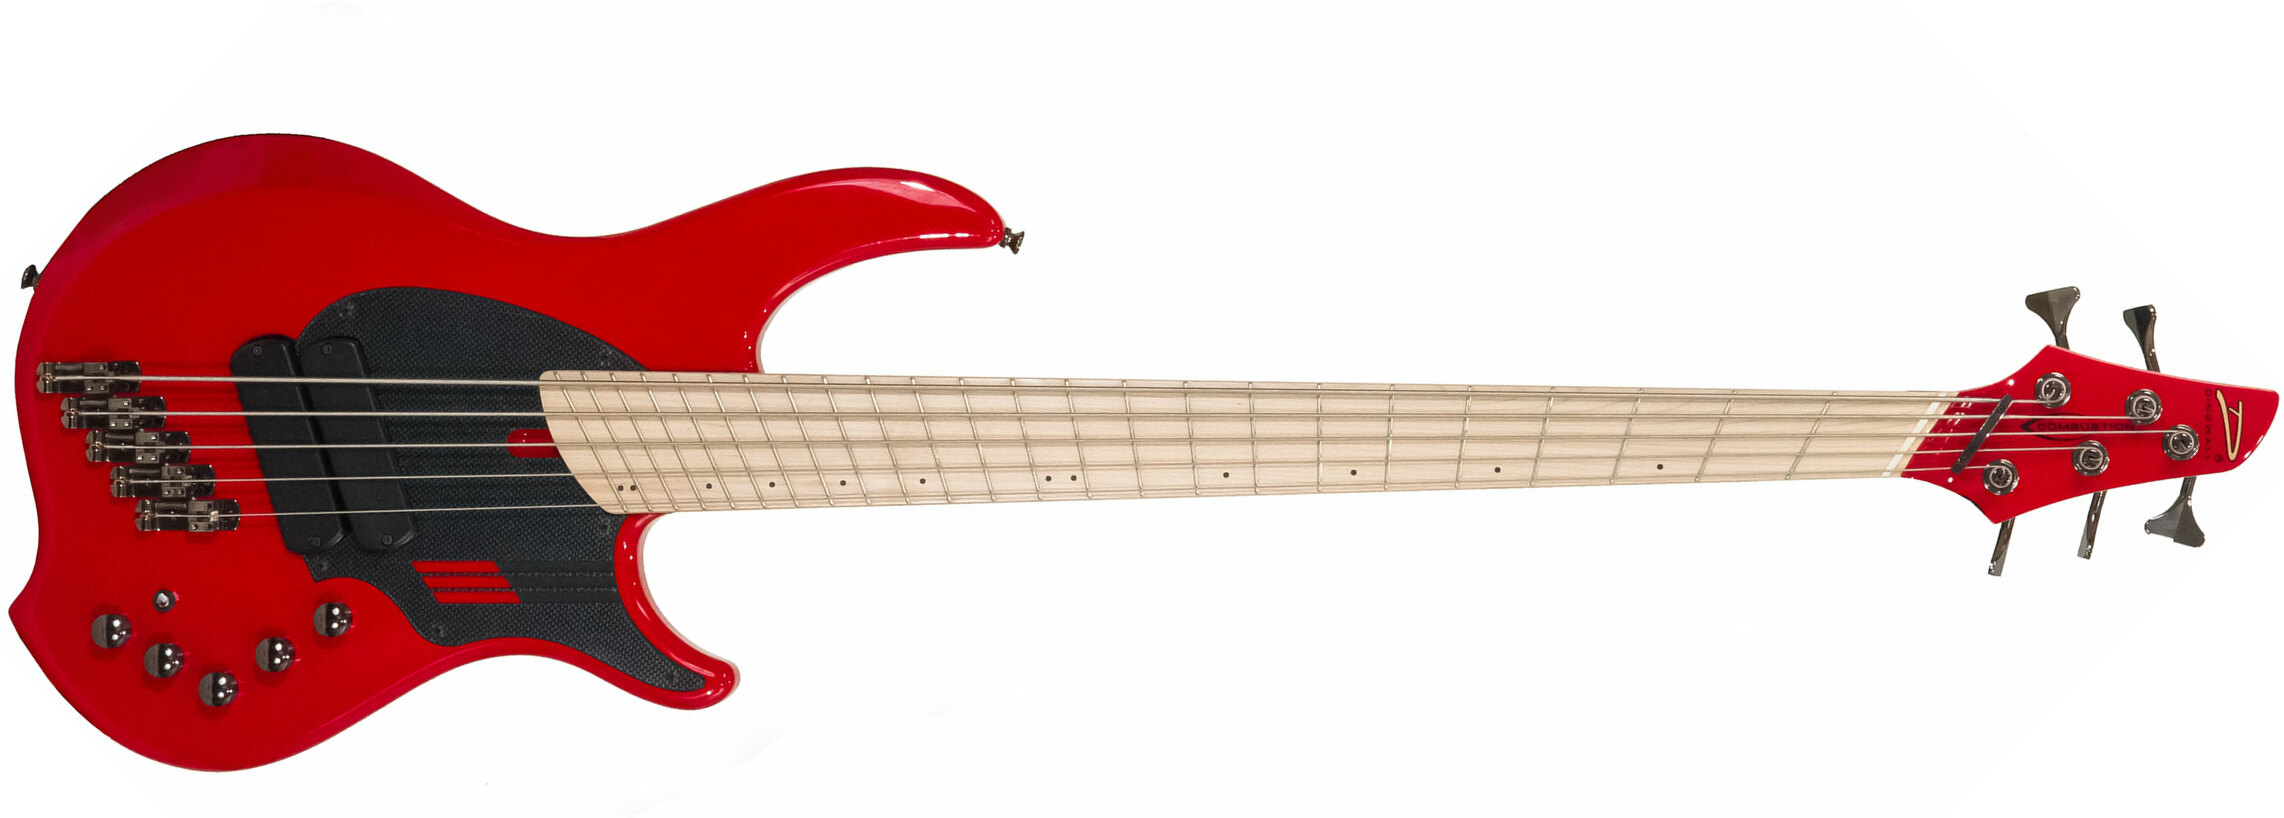 Dingwall Adam Nolly Getgood Ng2 5c Signature 2pu Active Mn - Ferrari Red - Basse Électrique Solid Body - Main picture